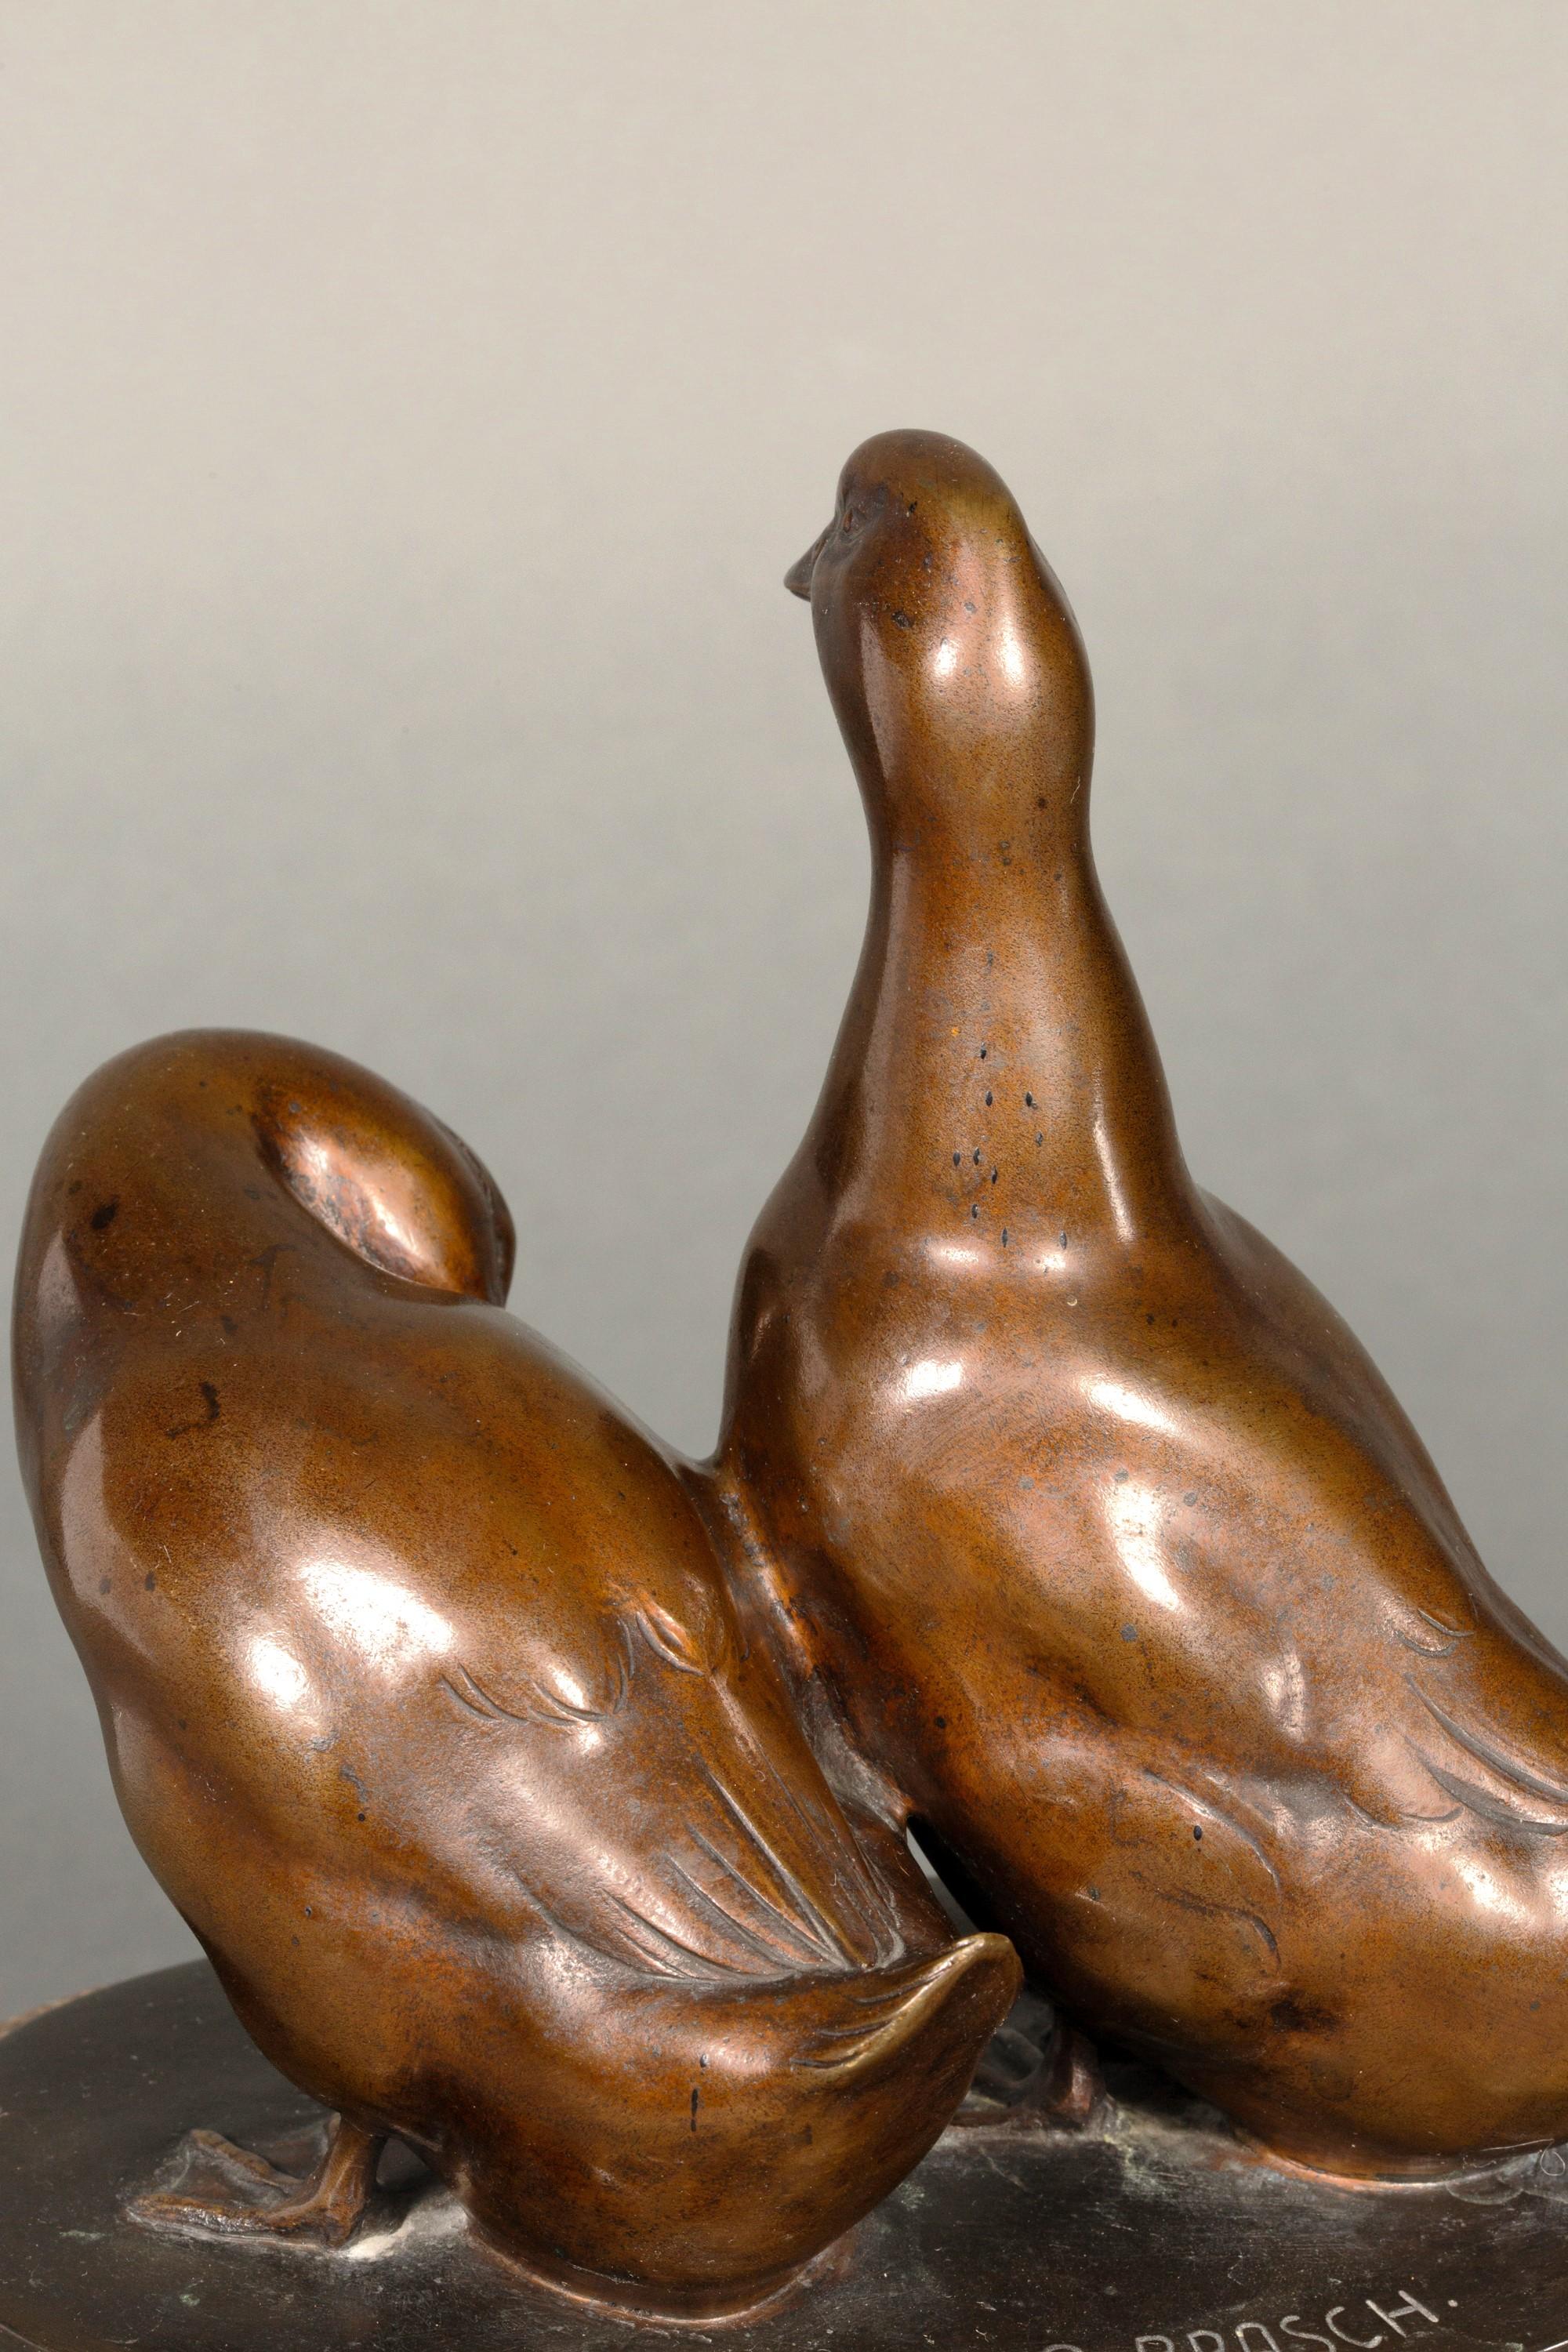 A very finely detailed and stylized bronze sculpture of a pair of ducks on a marble plinth. Signed C. Brasch. In terms of approach and style, this work is modern and somewhat reminiscent of François Pompon's later work.
Carl August Brasch